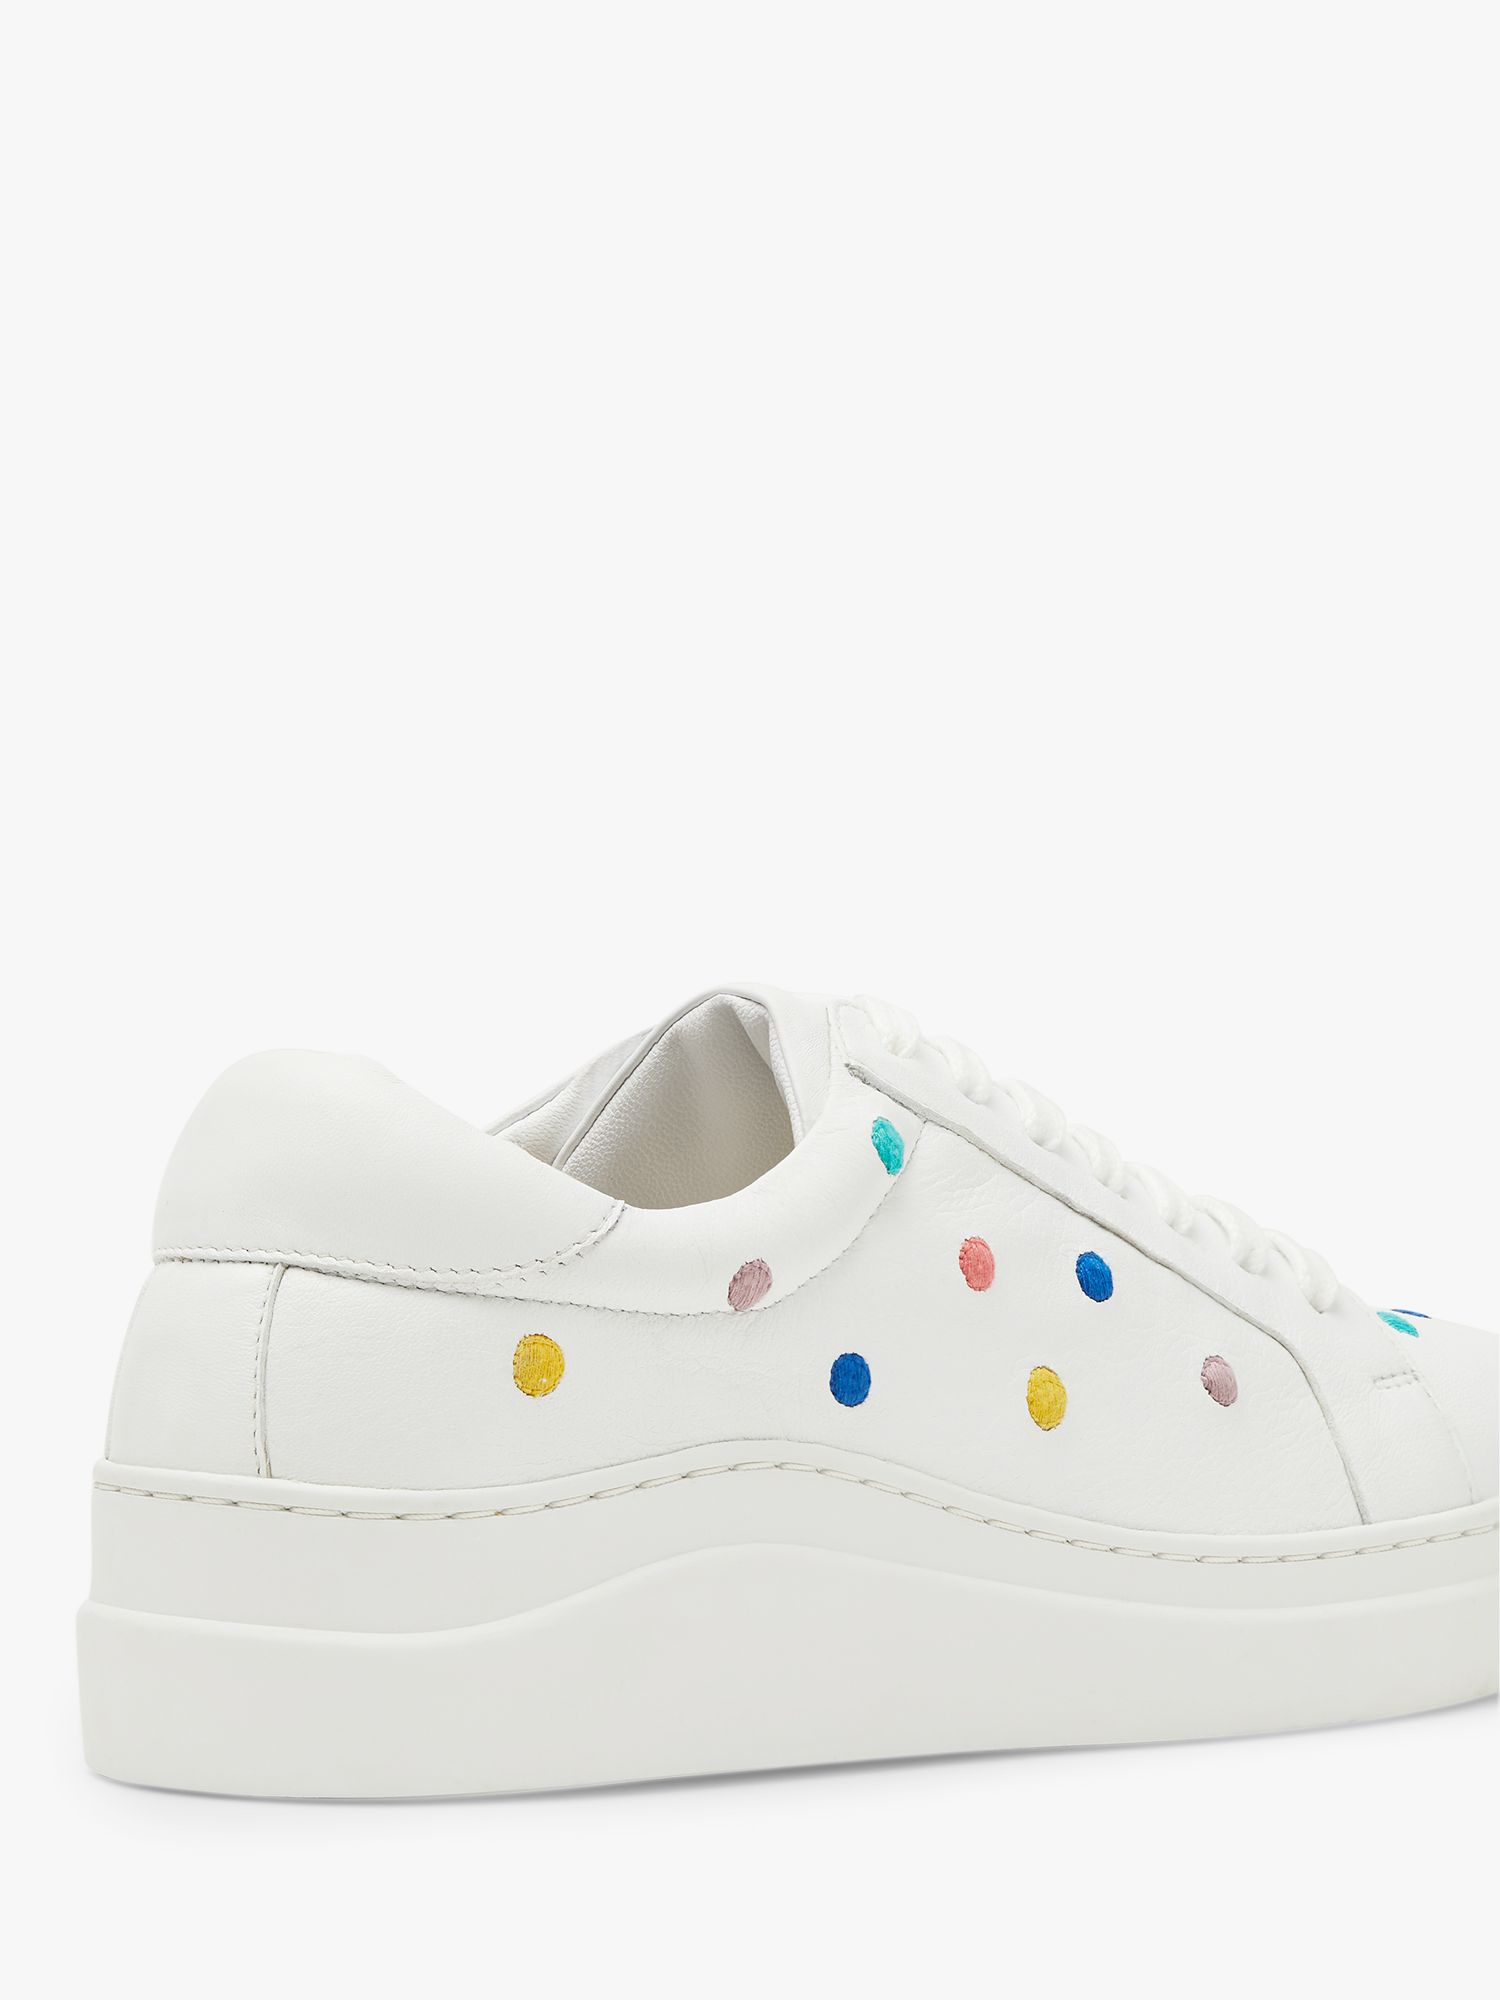 Boden Maria Leather Comfort Trainers, Maize Embroidered Spot